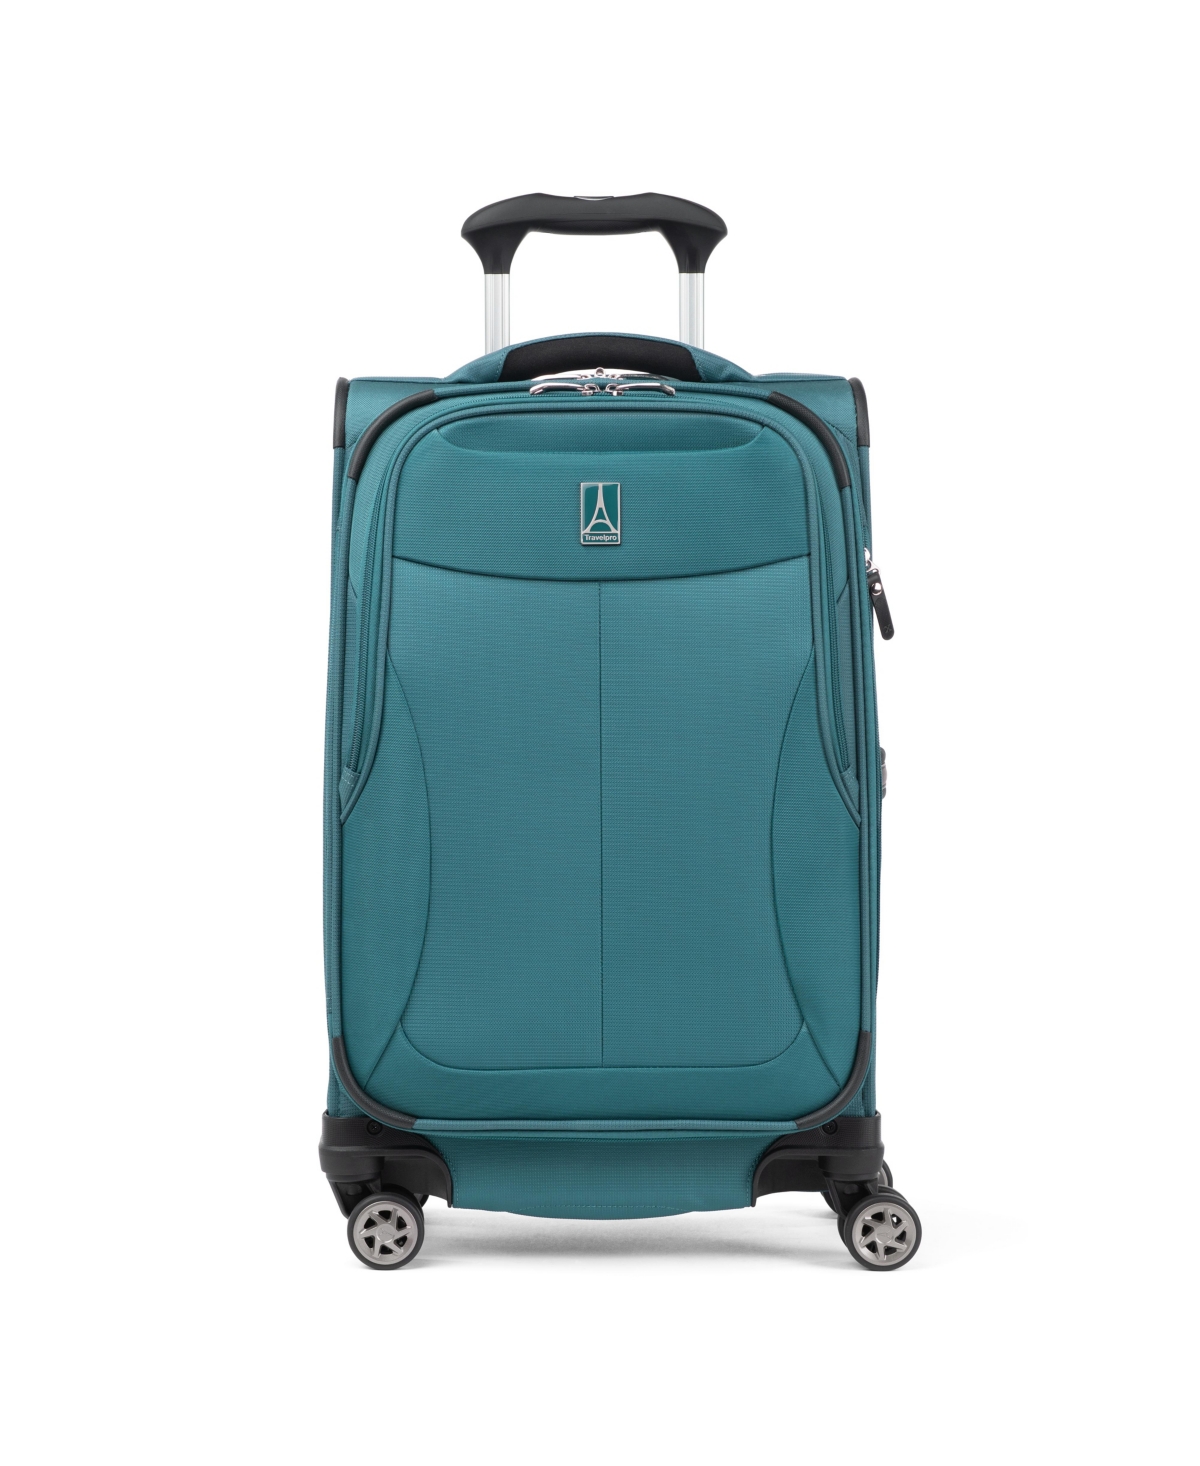 WalkAbout 6 Carry-on Expandable Spinner, Created for Macy's - Mediterranea